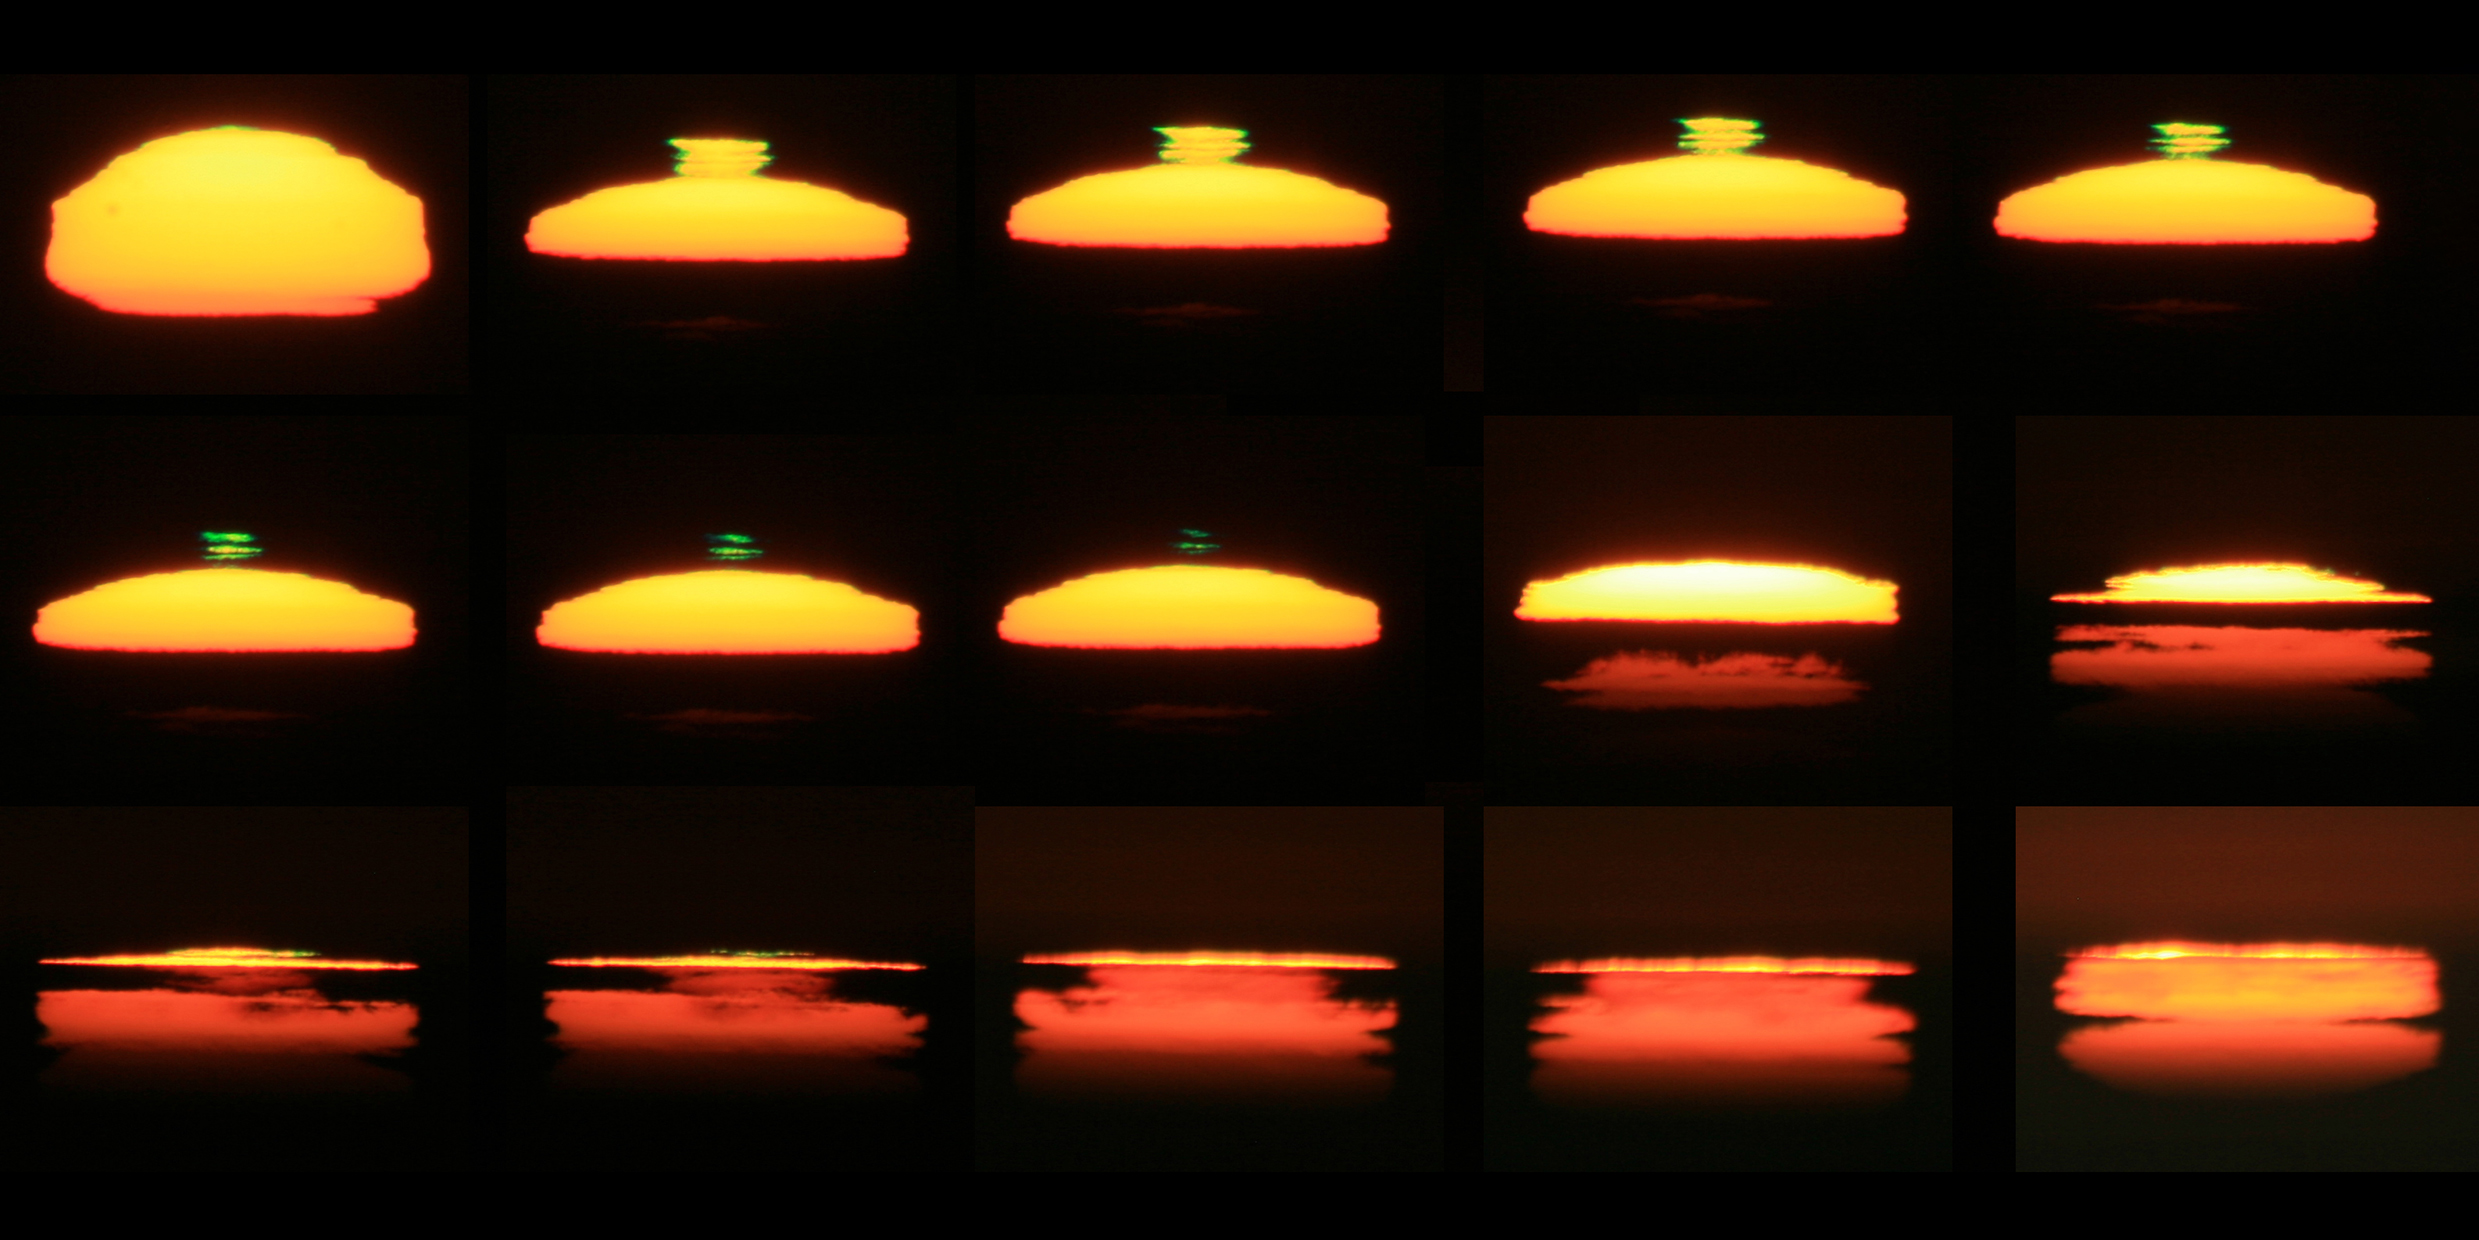 In pursuit of the elusive, ephemeral green flash